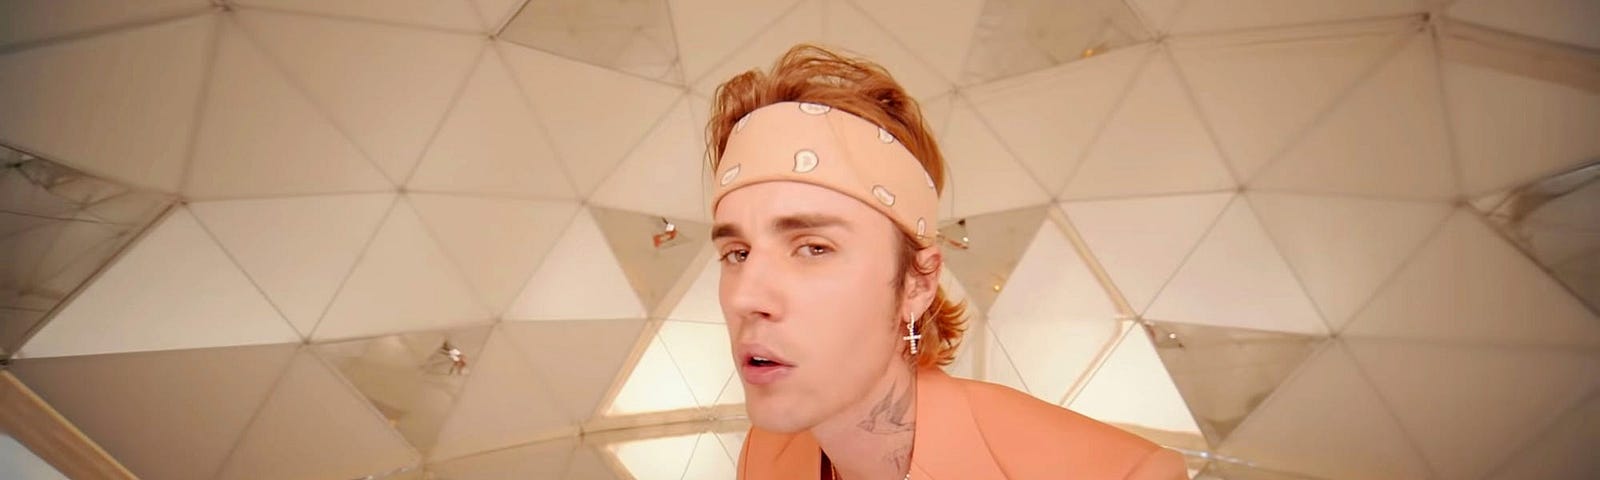 Justin Bieber in the music video for “Peaches.”